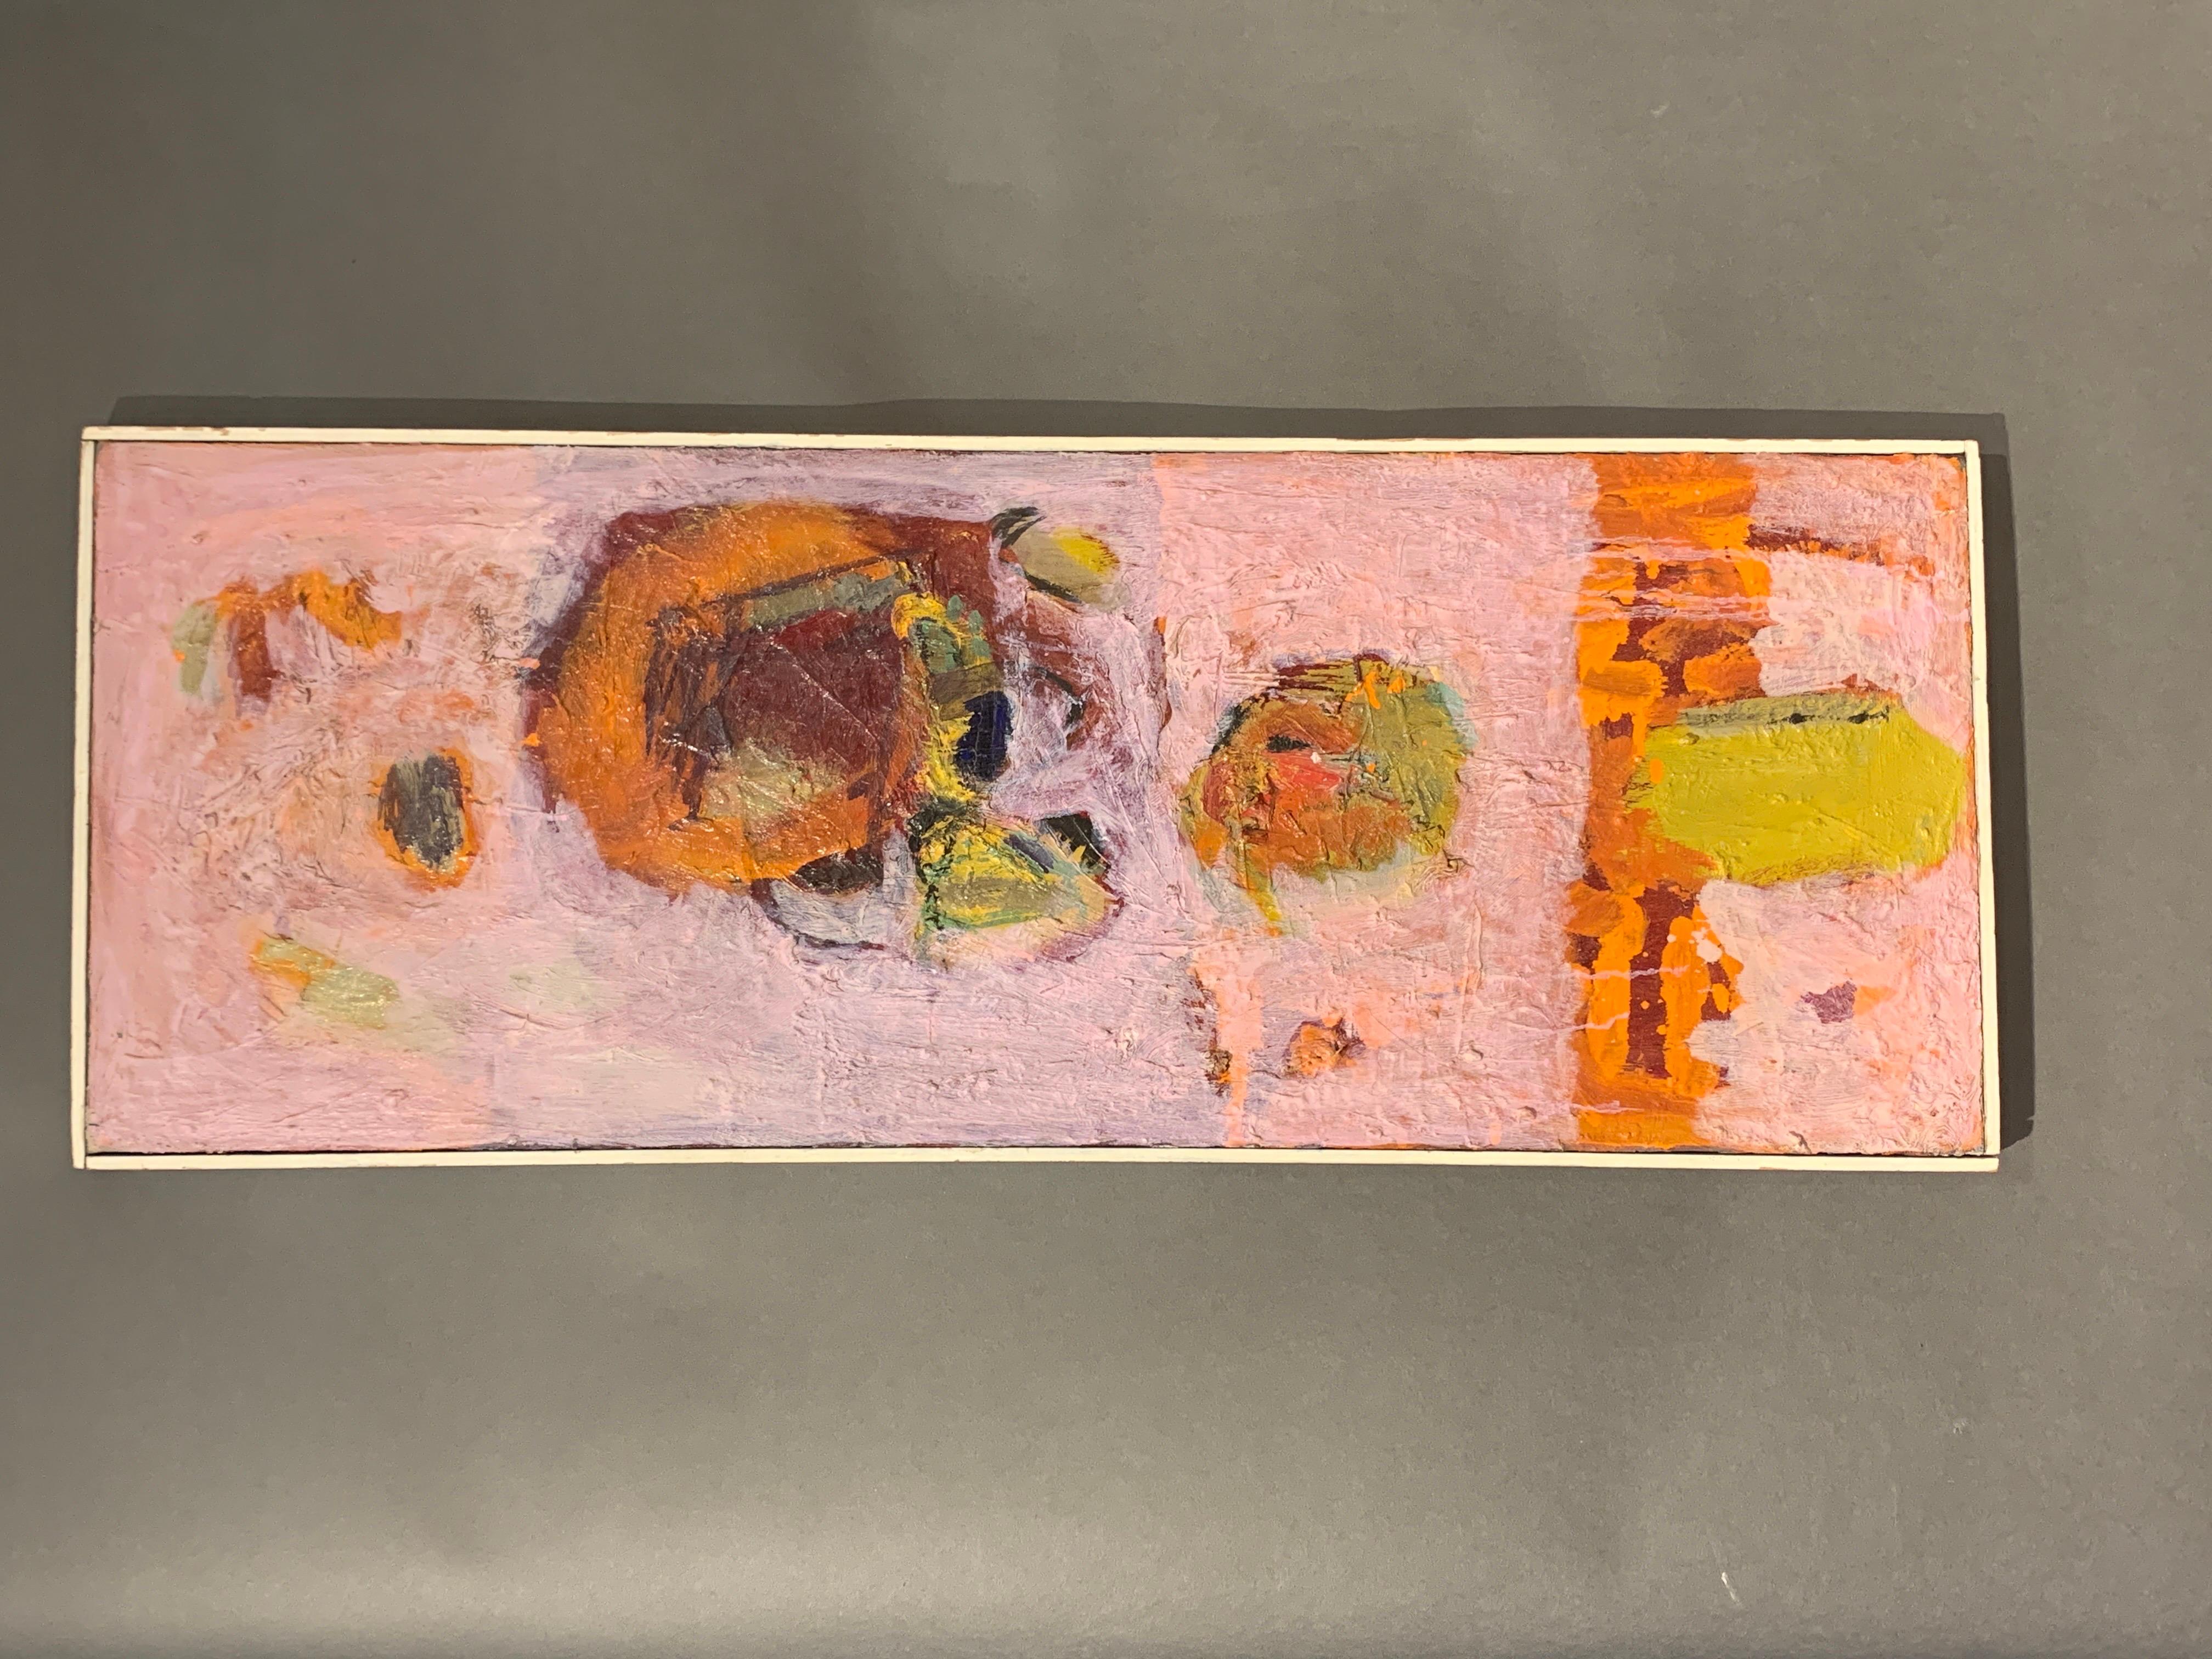 A very special brutalist abstract painting. Pink!!! The colorations mixed with orange and gold are wonderful. The artist name looks to be Samuel Lo, and was from San Francisco. Due to the age and pen used by artist it is not 100% legible. The piece